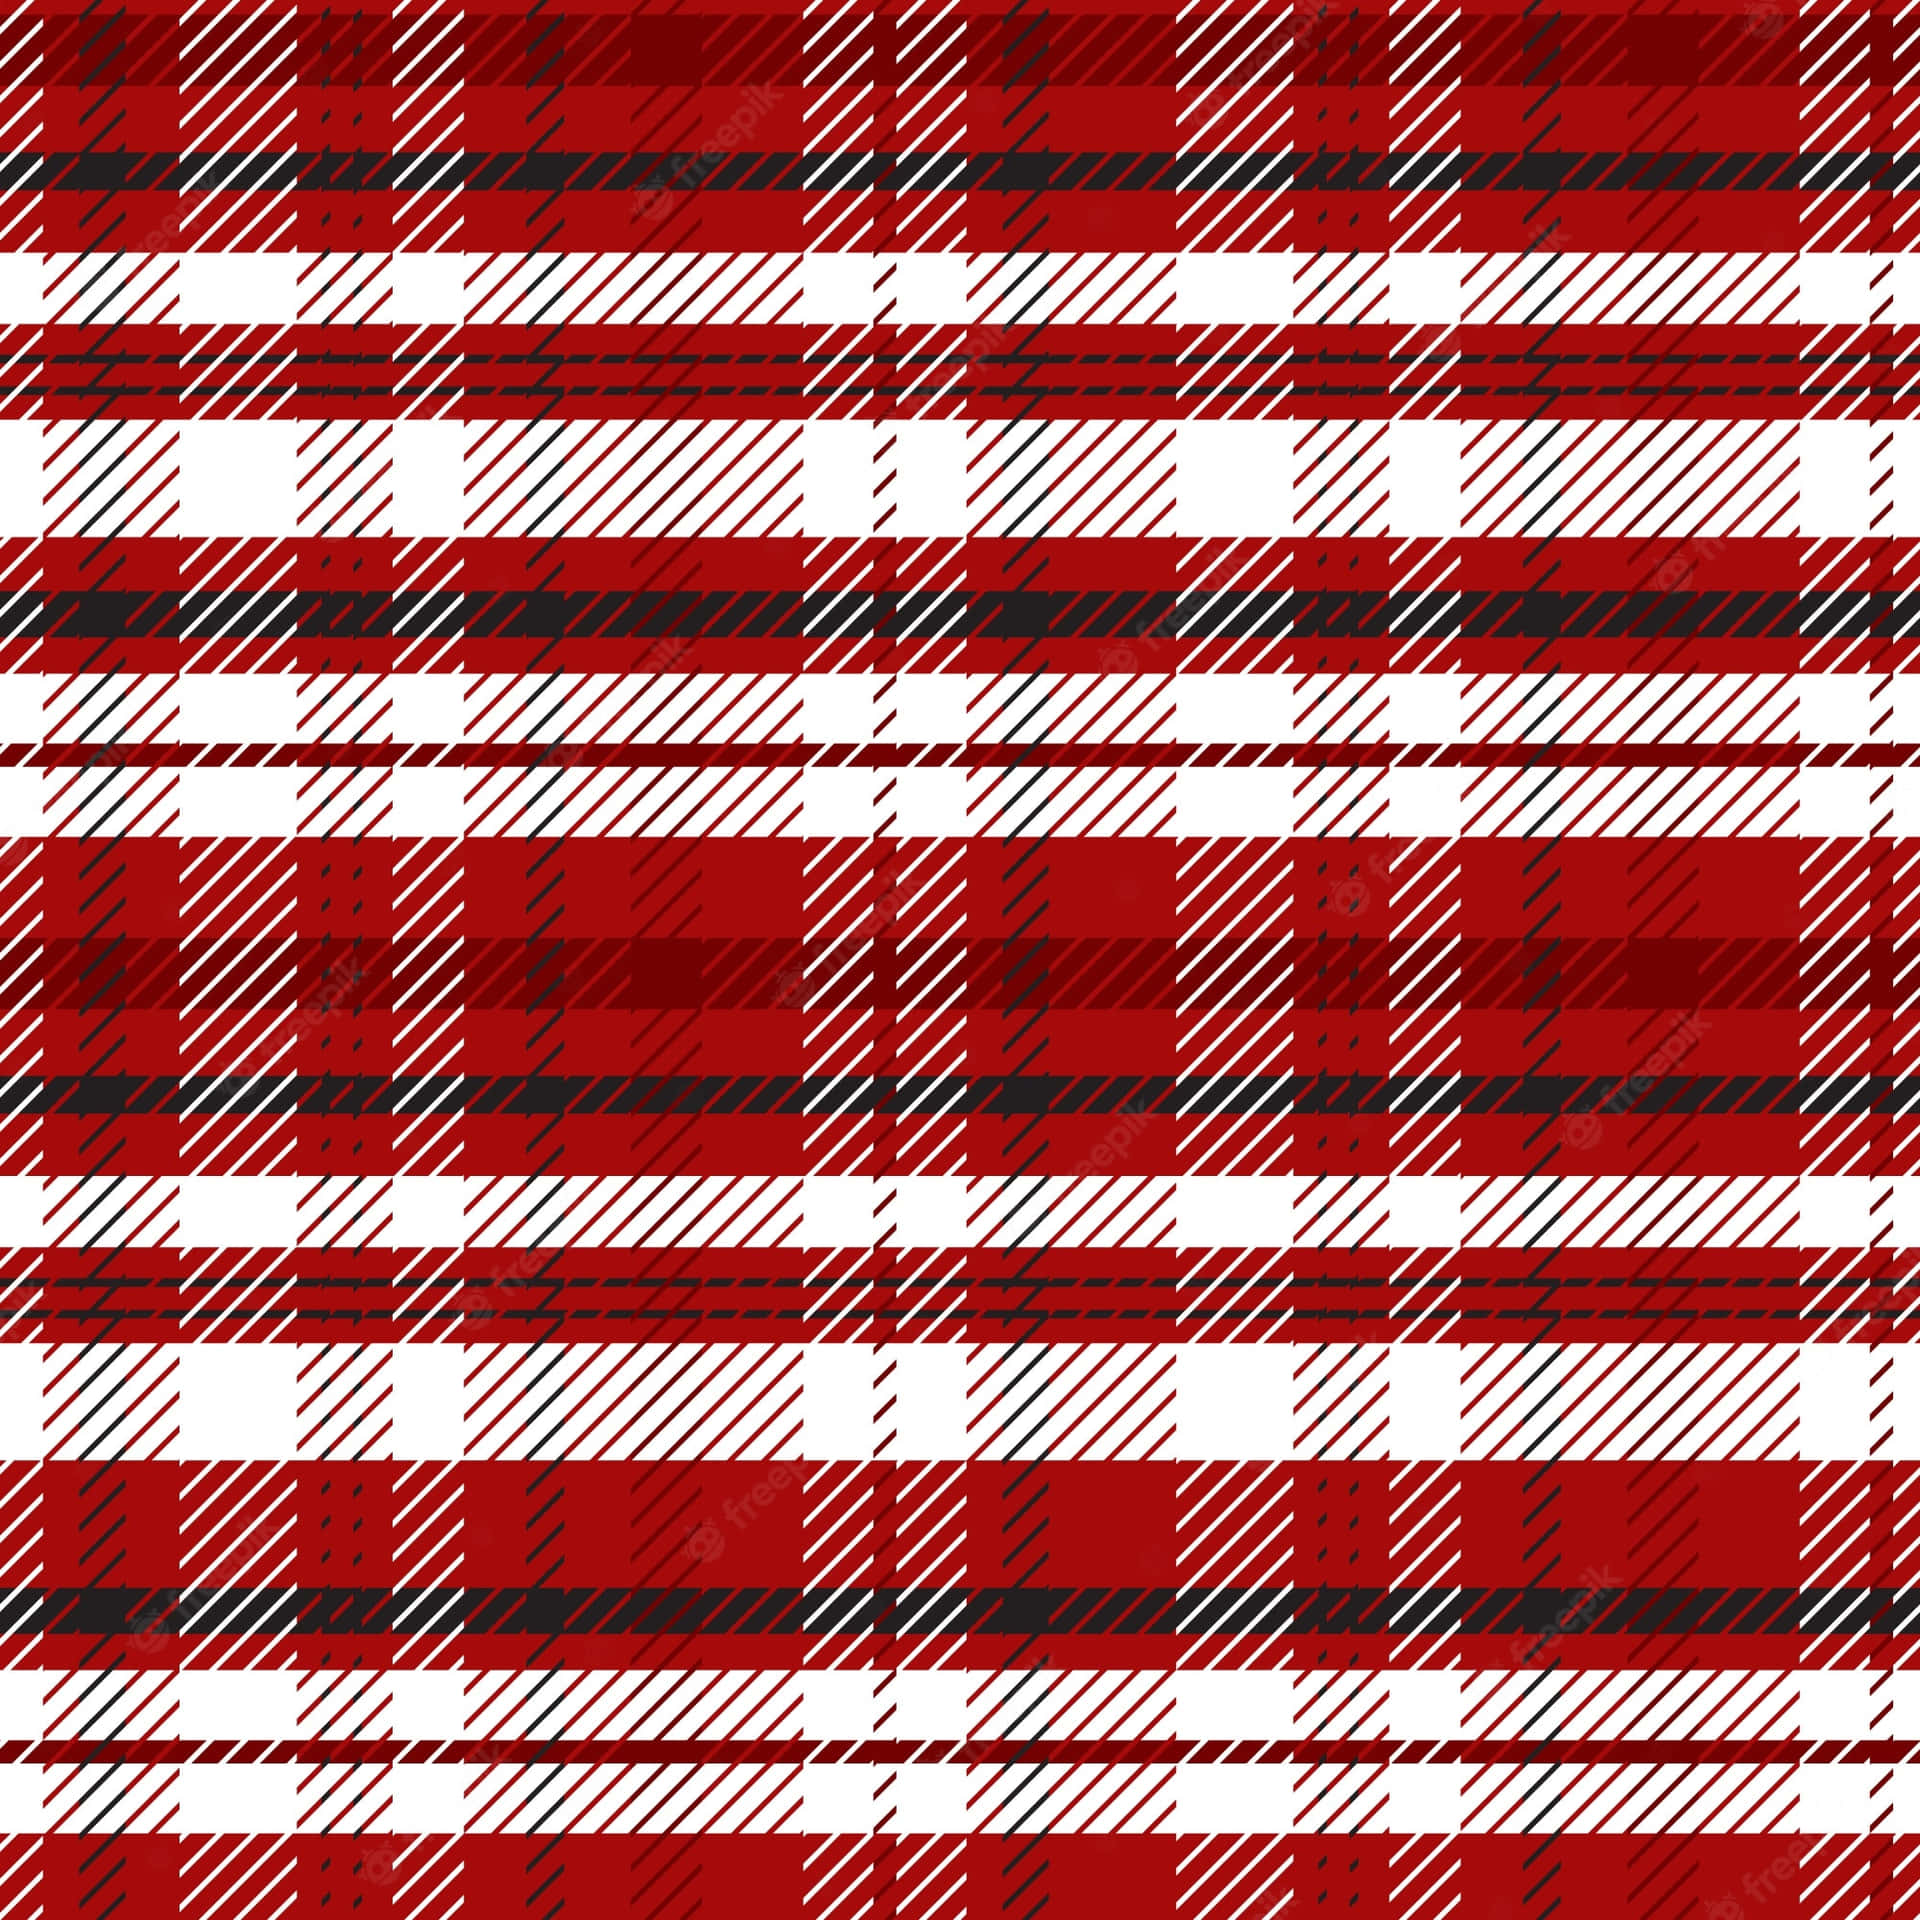 Bold and timeless, this classic black and red plaid pattern is perfect for all occasions. Wallpaper